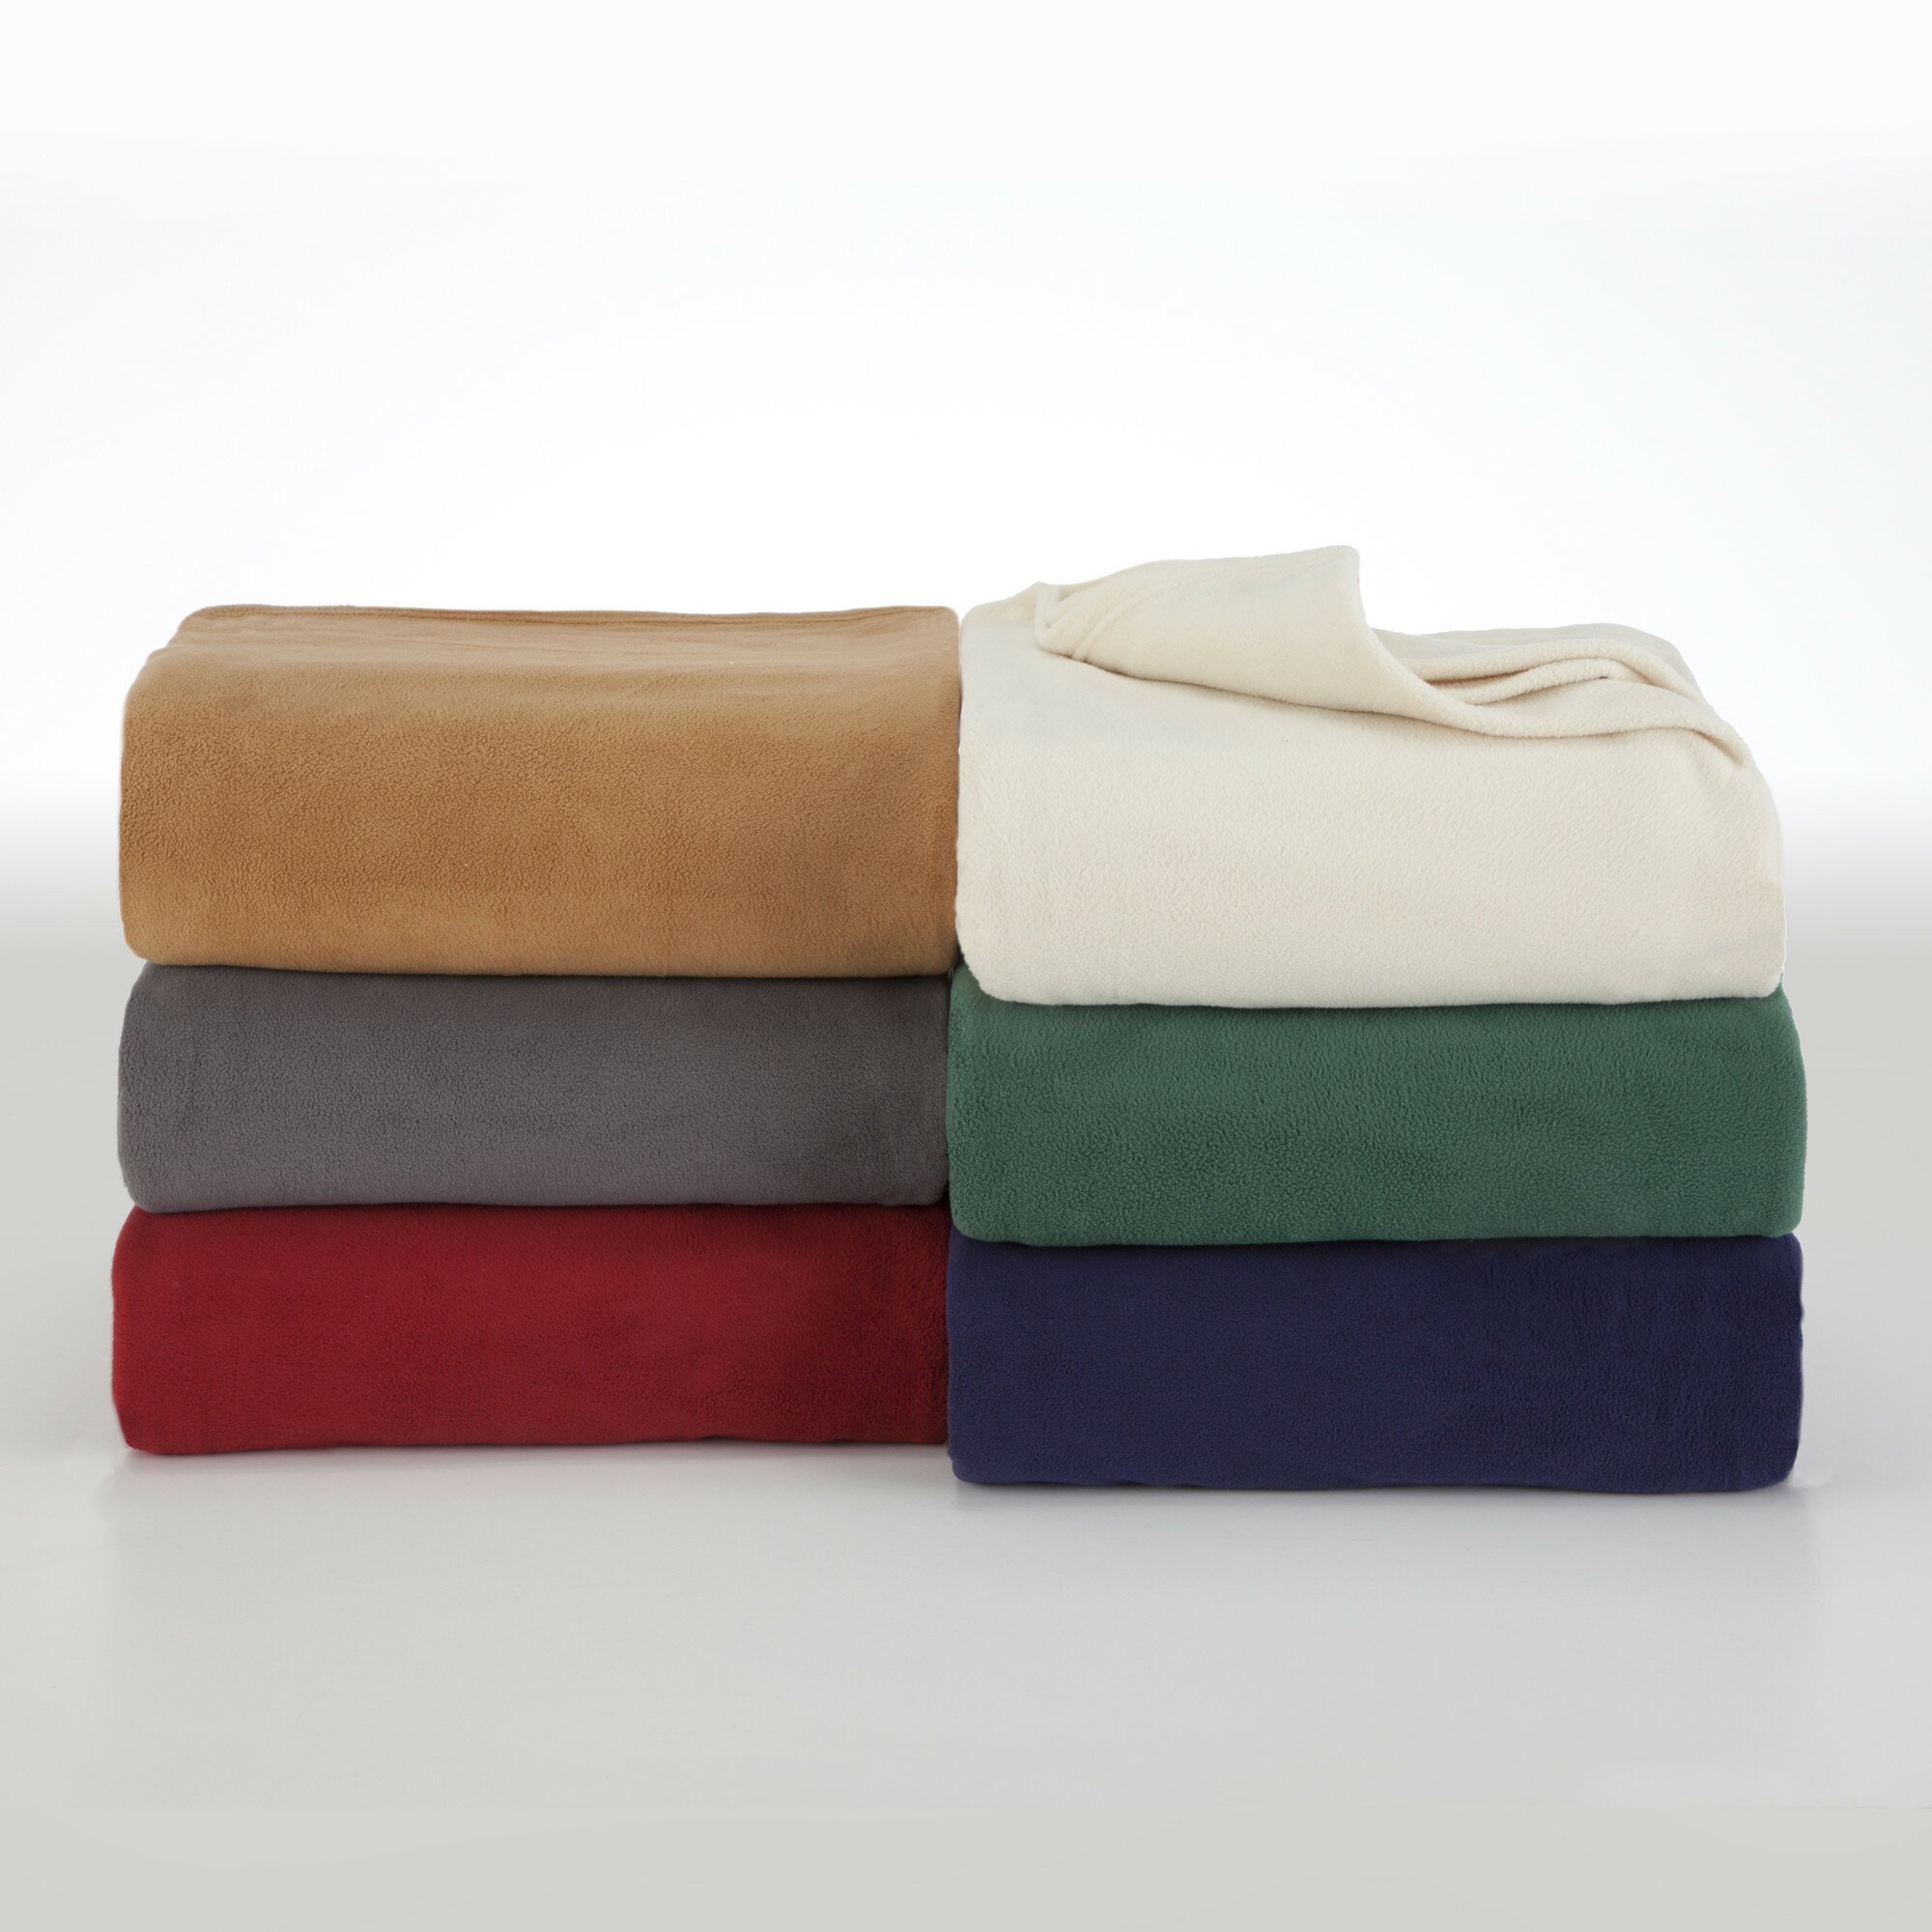 Vellux Plush Blanket | Blankets & Throws | Home ...